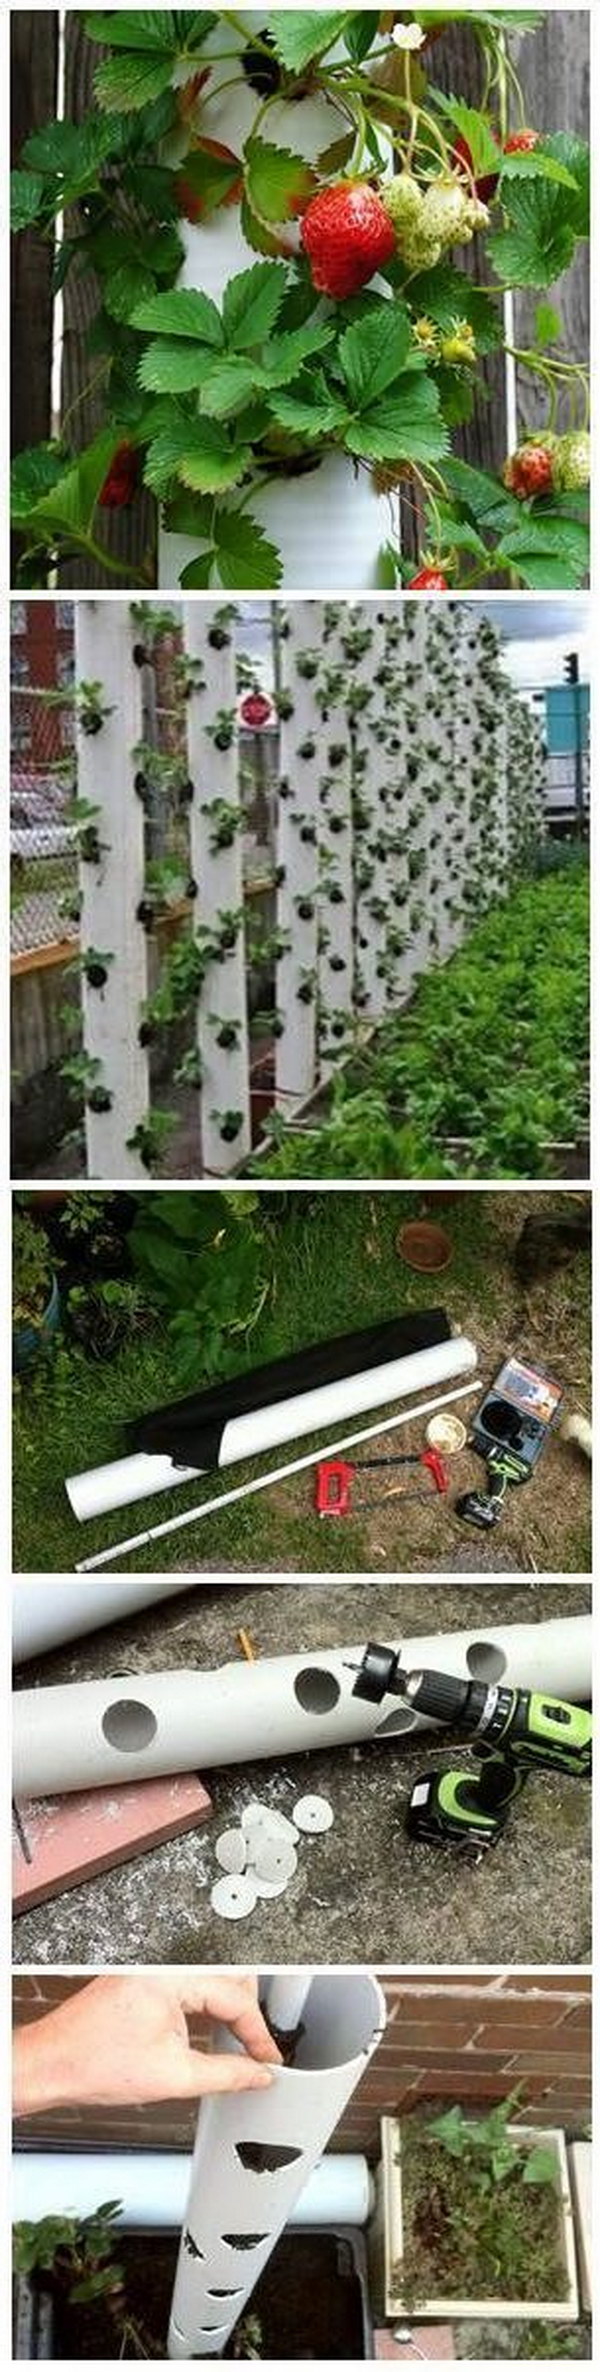 DIY Strawberry Vertical Garden Made From PVC Tubes 